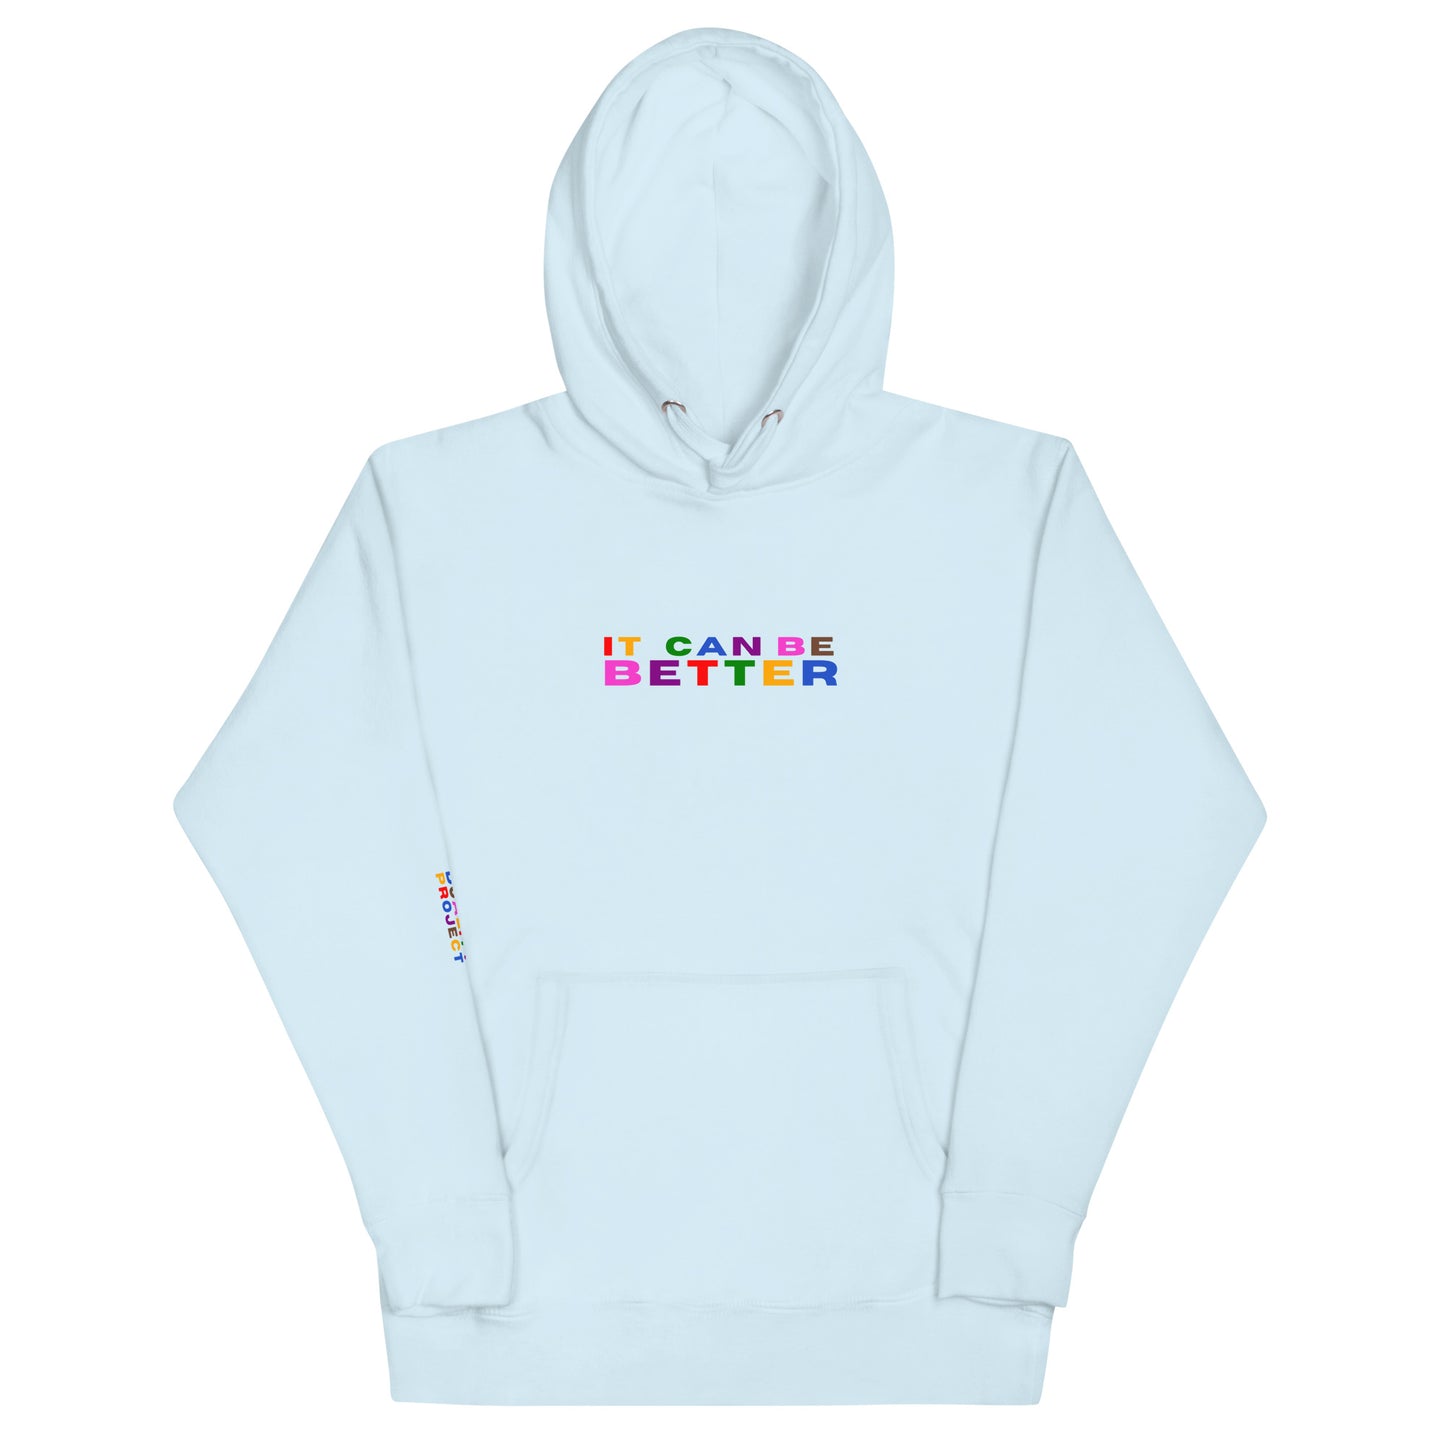 *it can be better* - rainbow - Unisex Hoodie